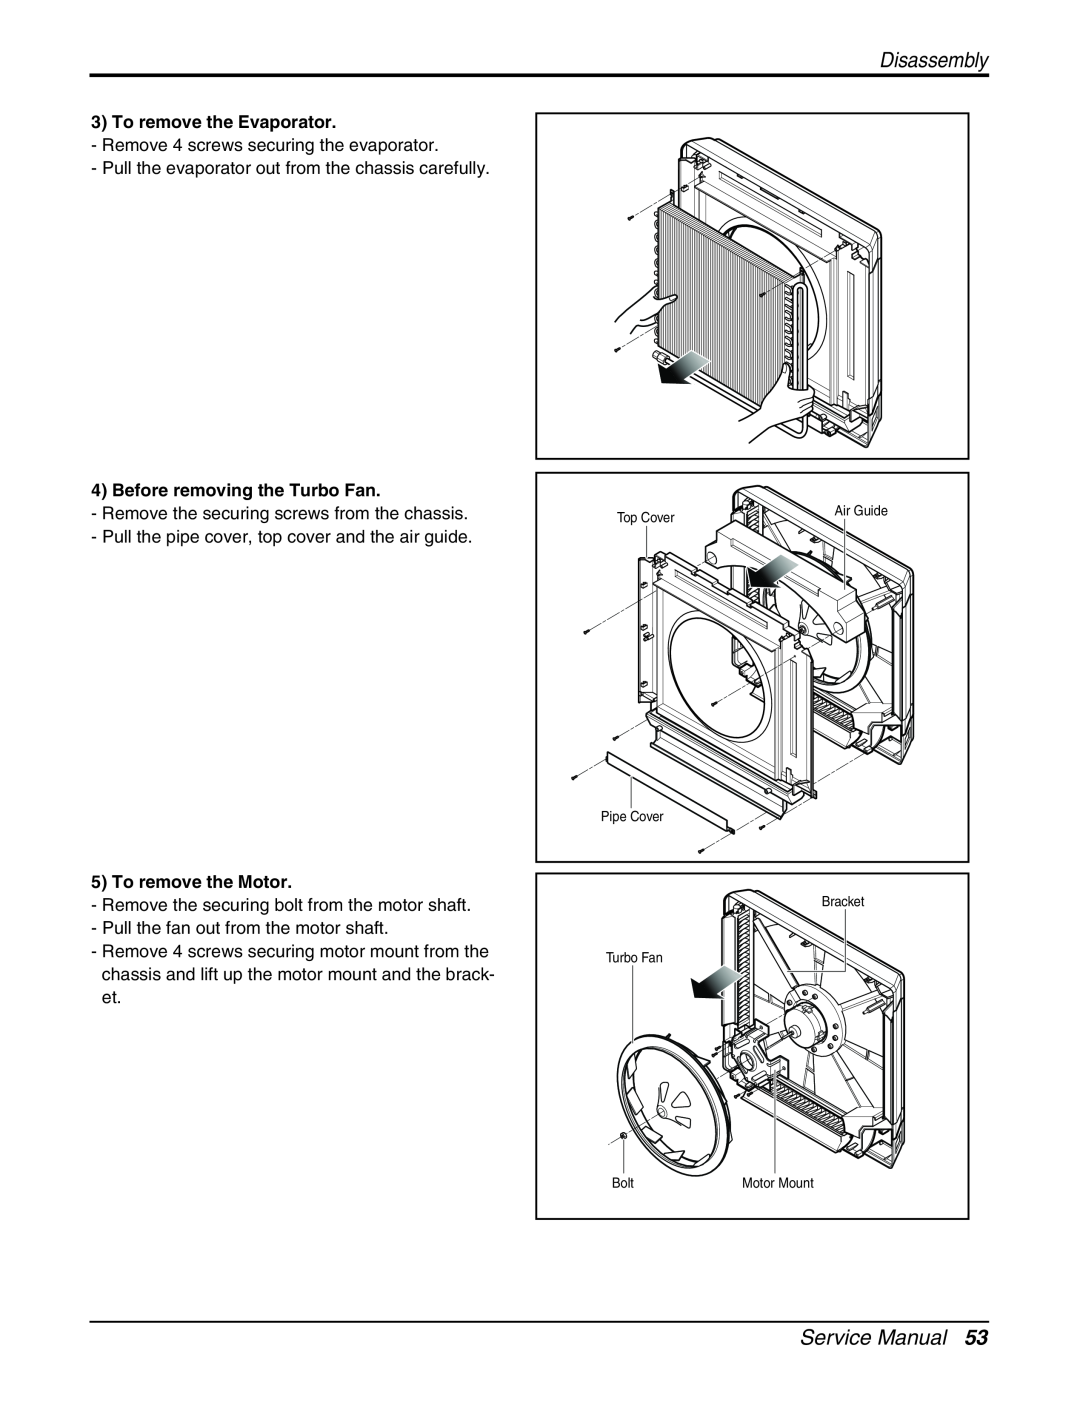 LG Electronics AMNC123DEA0 (LMN120CE) Disassembly, Service Manual, To remove the Evaporator, Before removing the Turbo Fan 